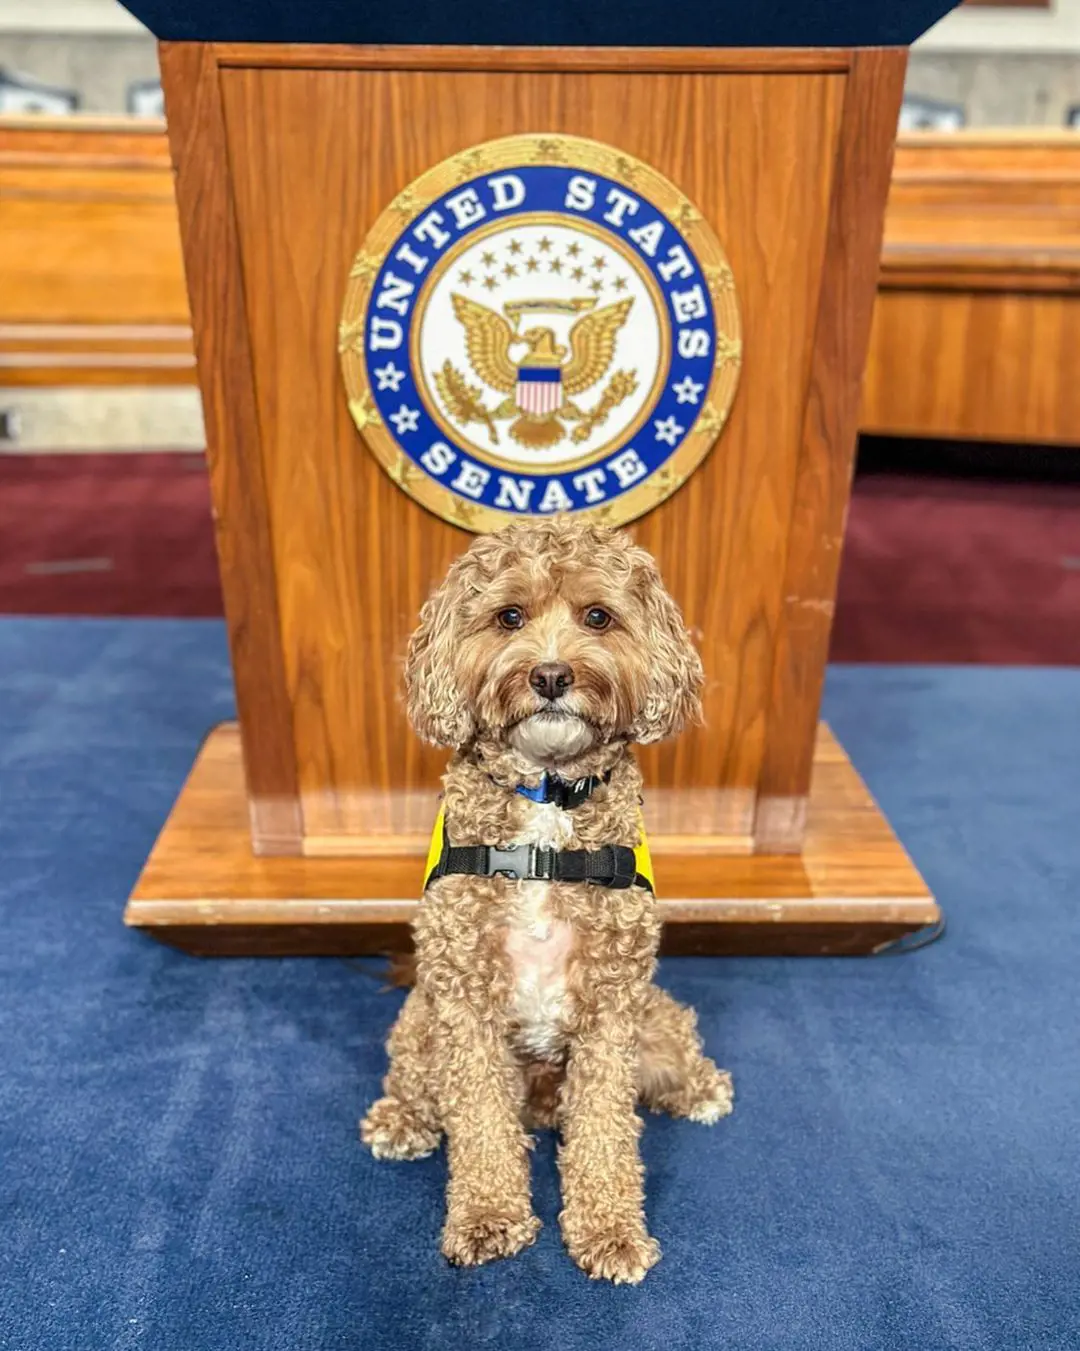 A well groomed therapy Cavapoo attend a meeting with American Senate at Dirksen Senate Office Building.